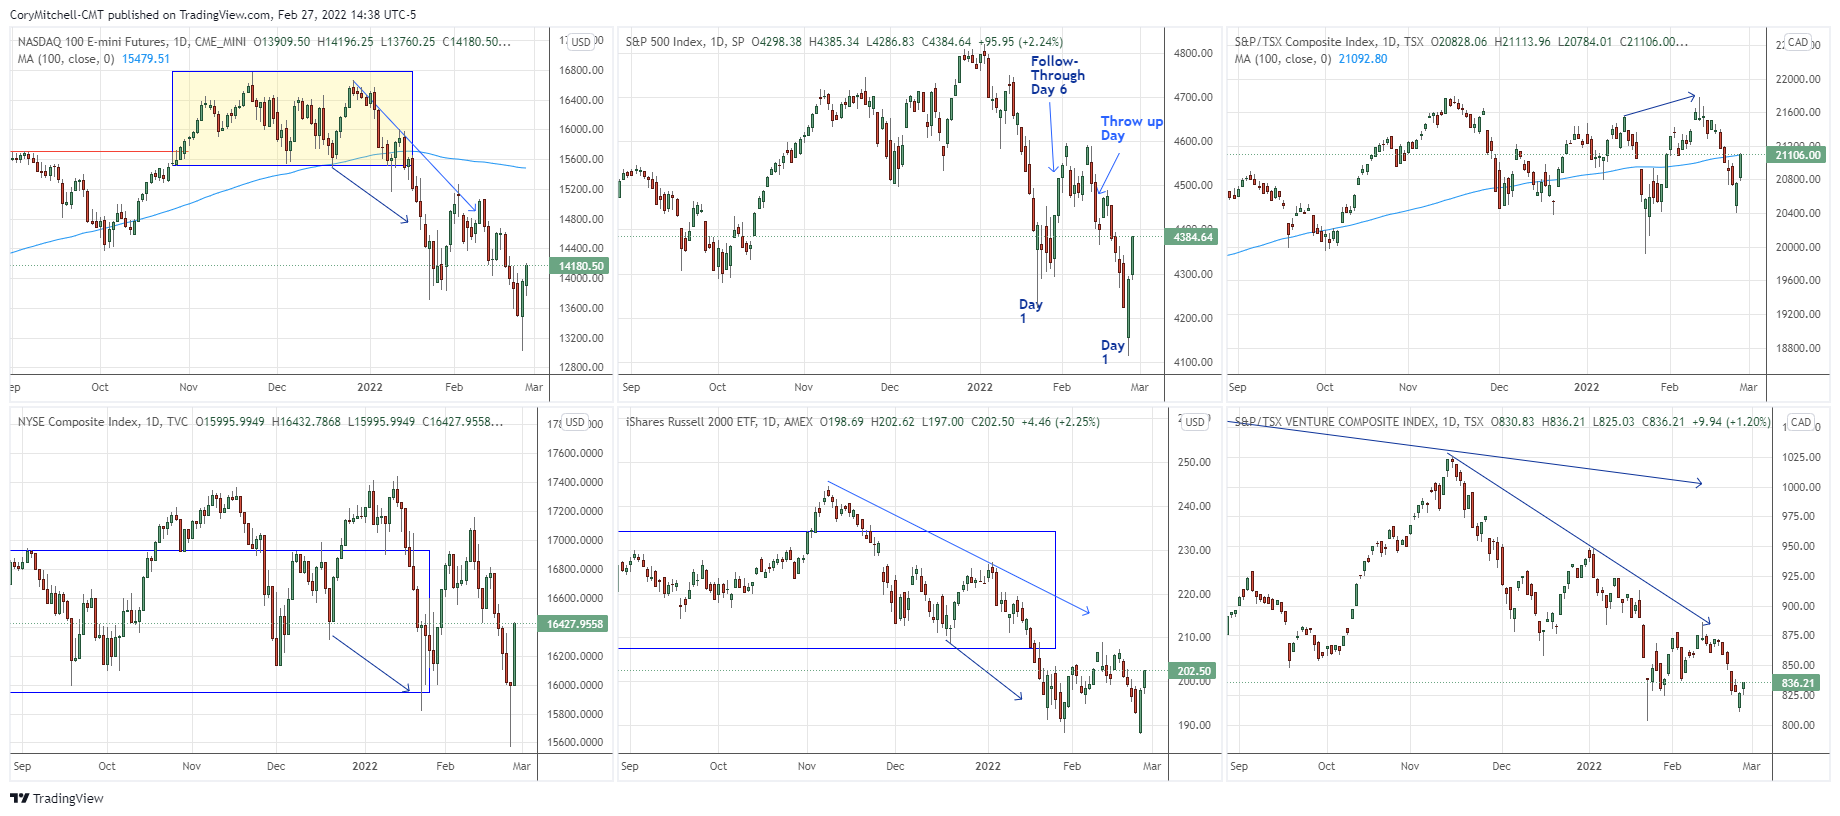 US and Canadian stock index comparison Feb 27